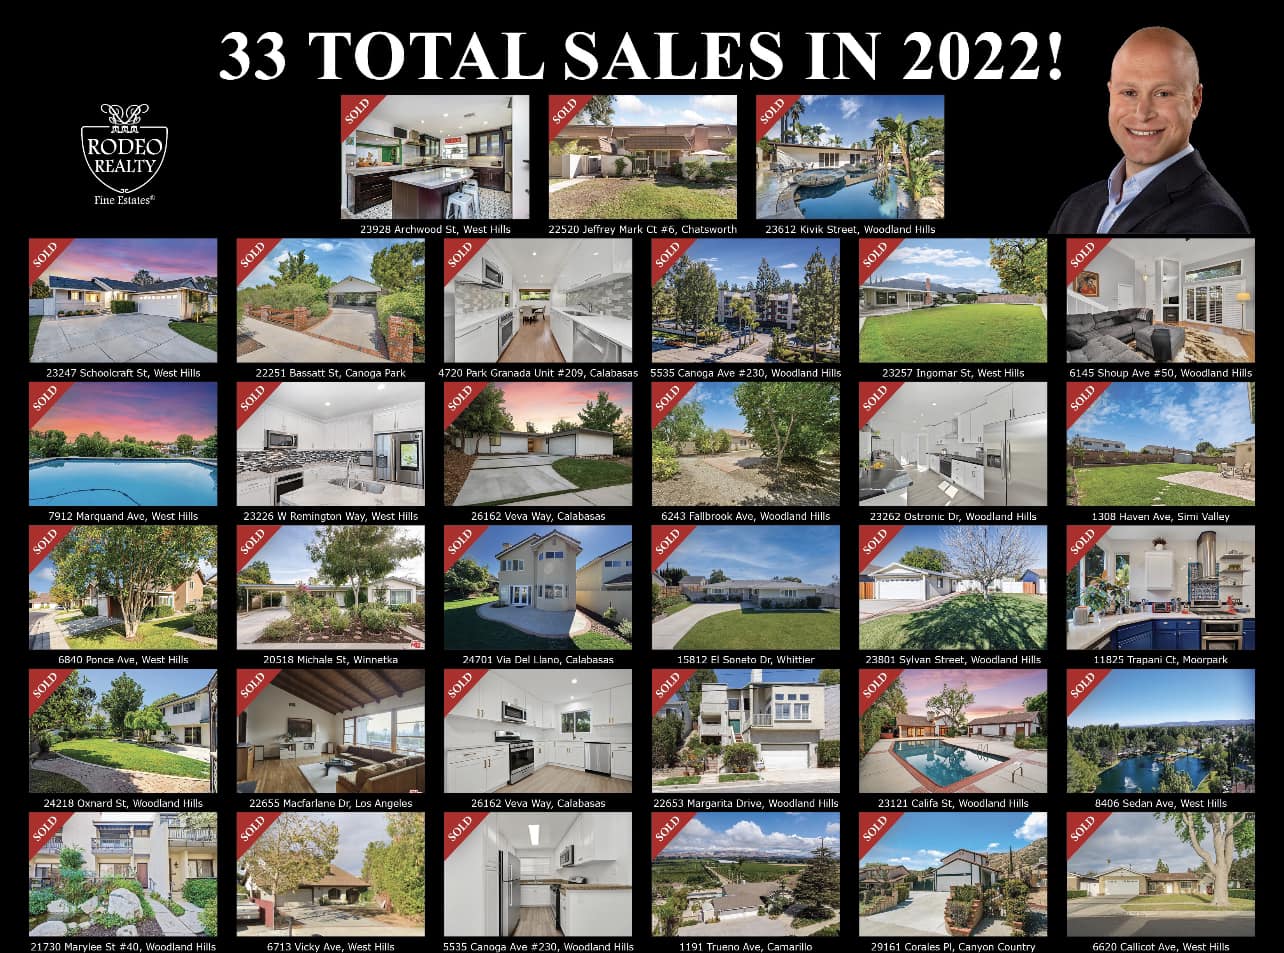 2022 real estate sales in Calabasas, West Hills, Woodland hills and surrounding areas